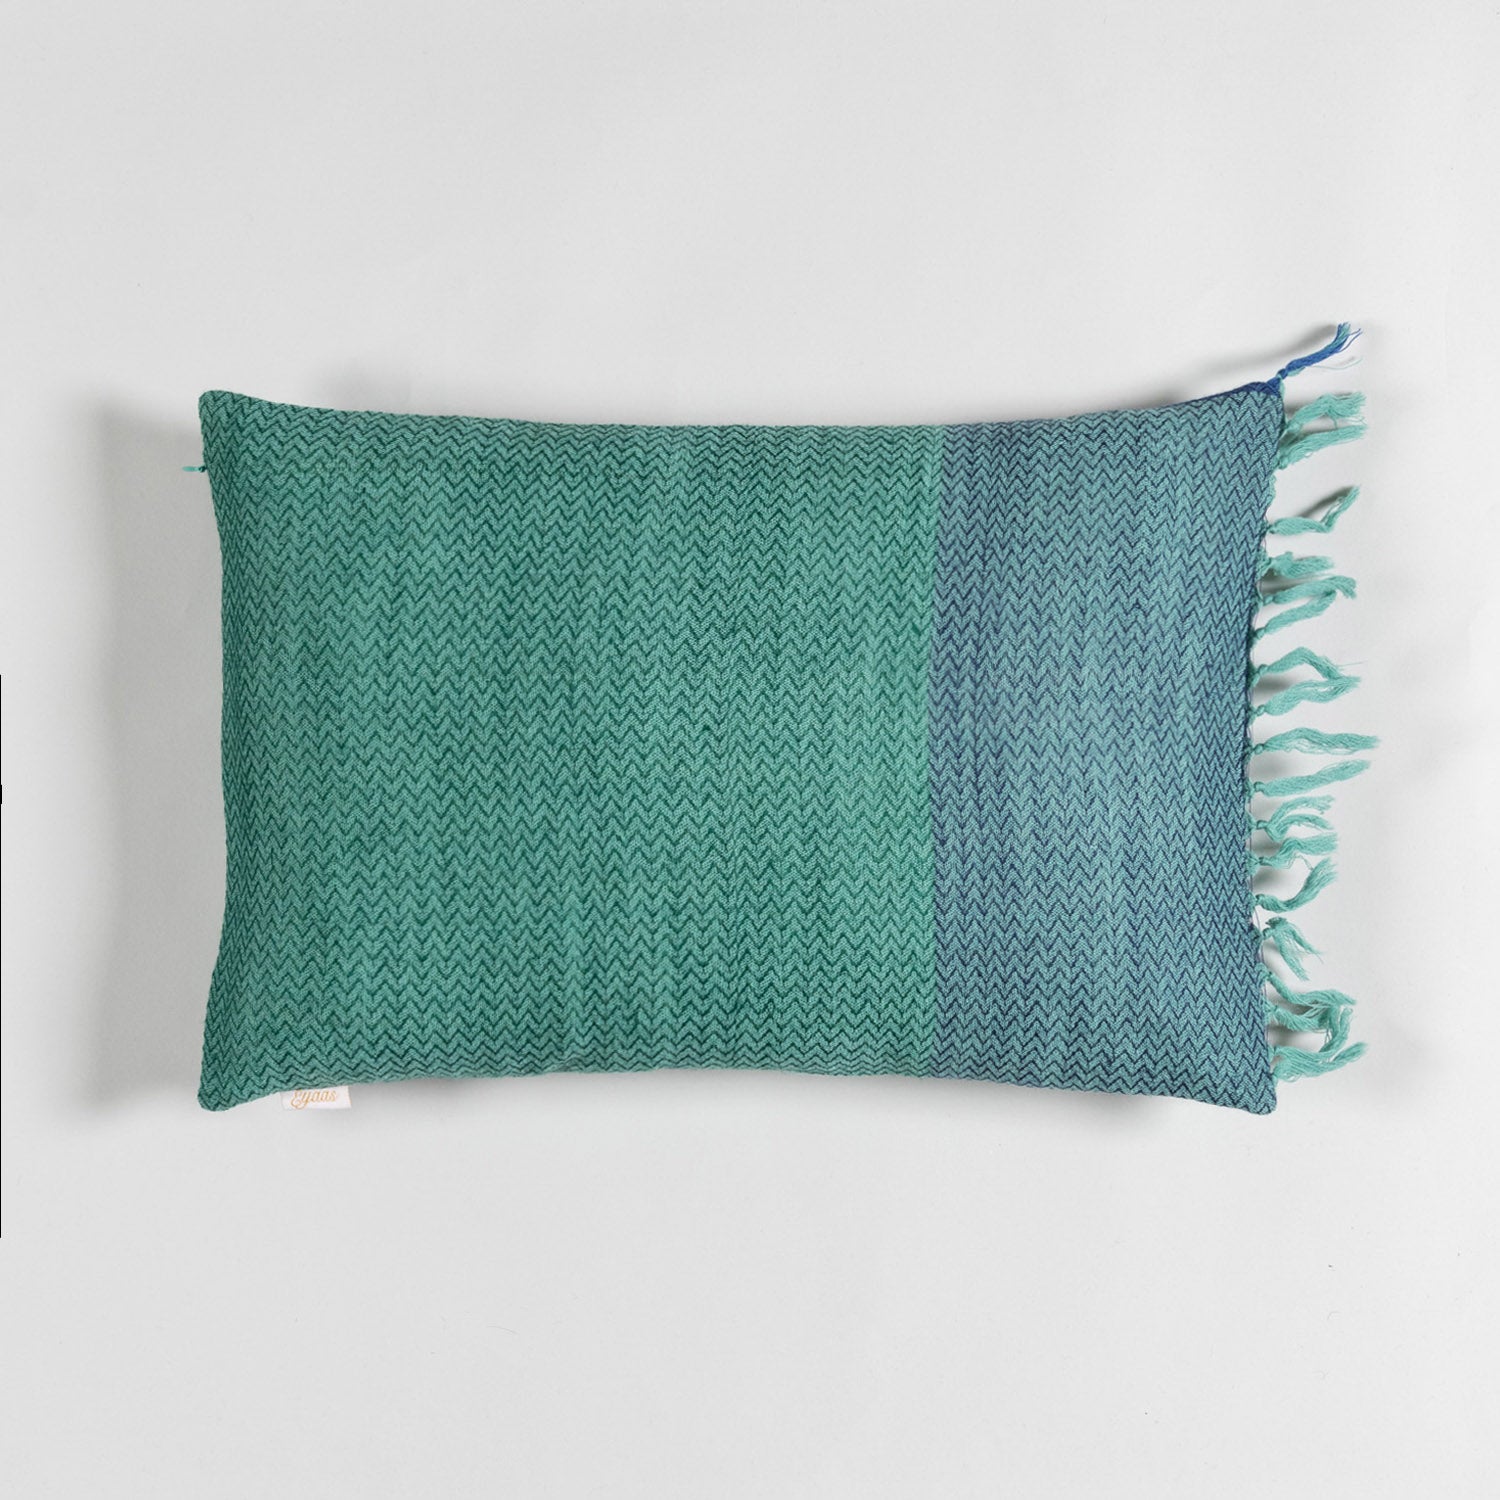 Handwoven Upcycled Turquoise Wool & Oak Silk Cushion Cover - 12x18